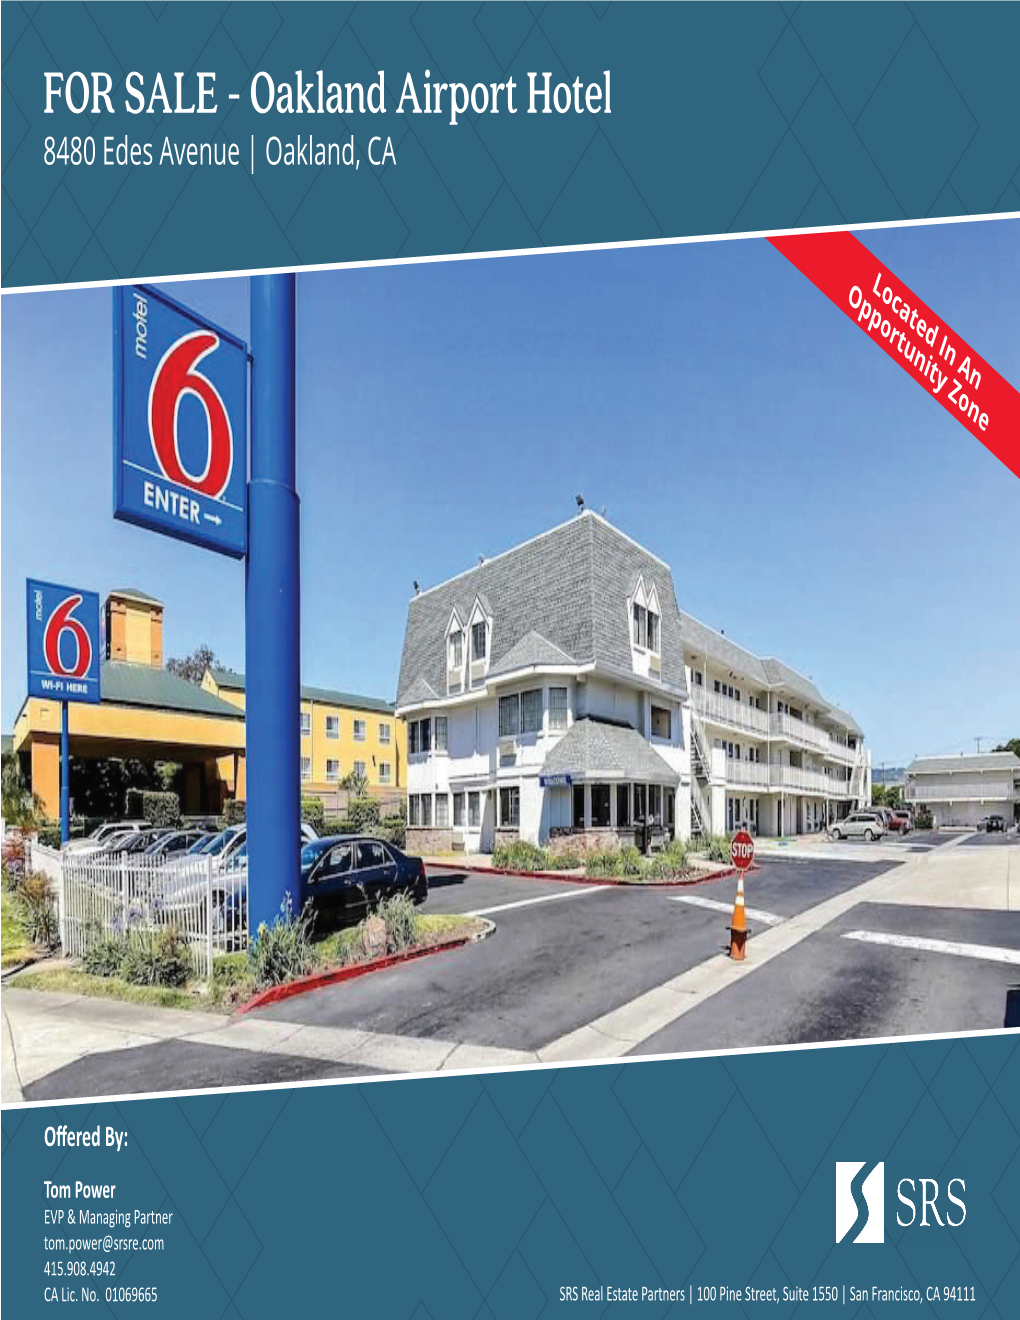 Oakland Airport Hotel Airport SALE - Oakland for 8480 Edes Avenue | Oakland, CA Property Information Disclaimer 8480 Edes Avenue | Oakland, CA